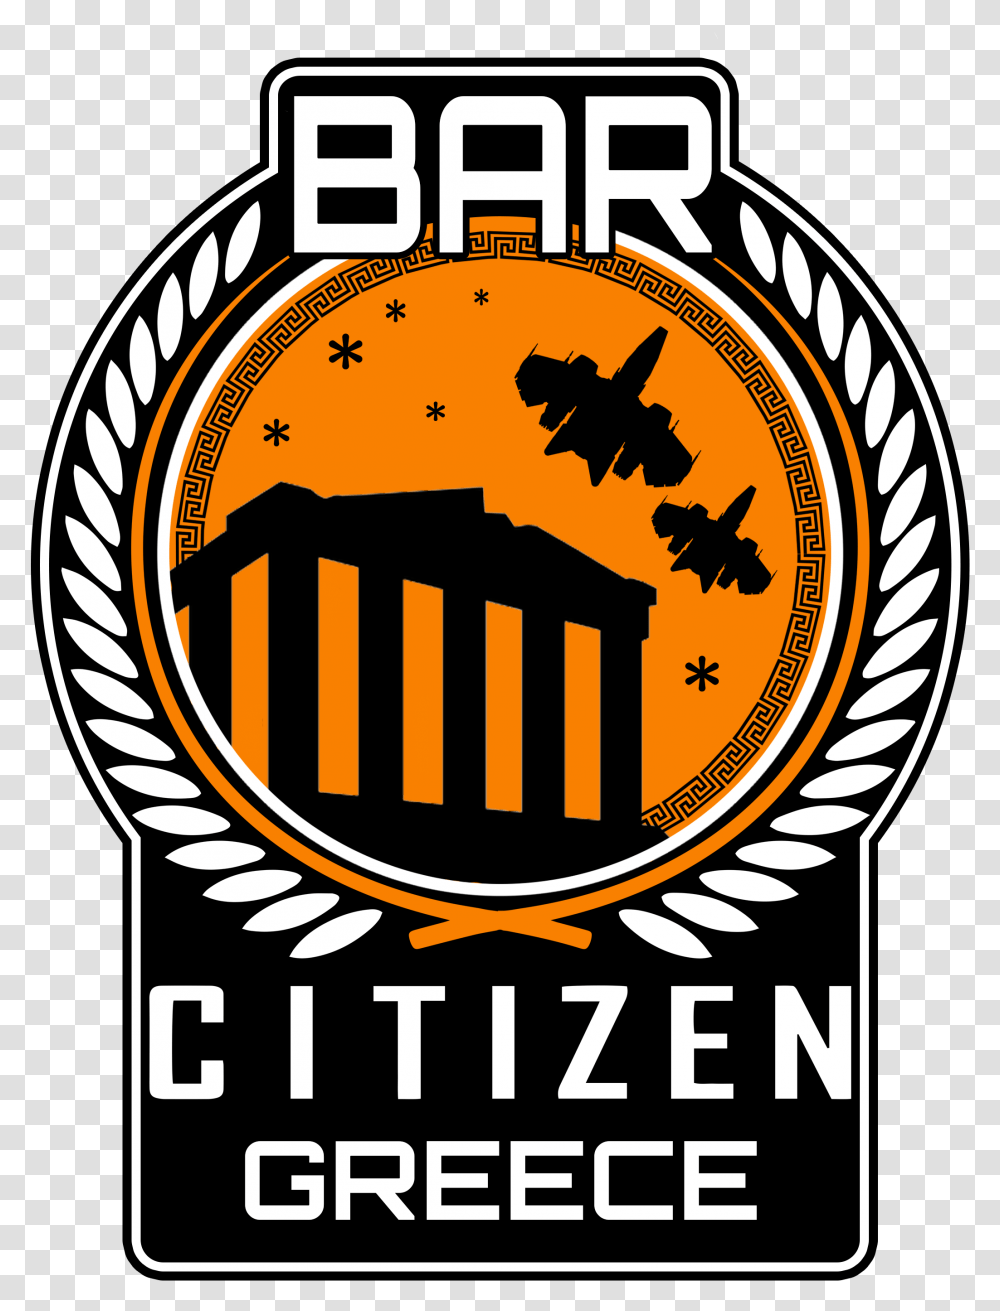 Bar Citizen Athensgreece General Discussion Star New Hampshire State Seal, Logo, Symbol, Trademark, Label Transparent Png